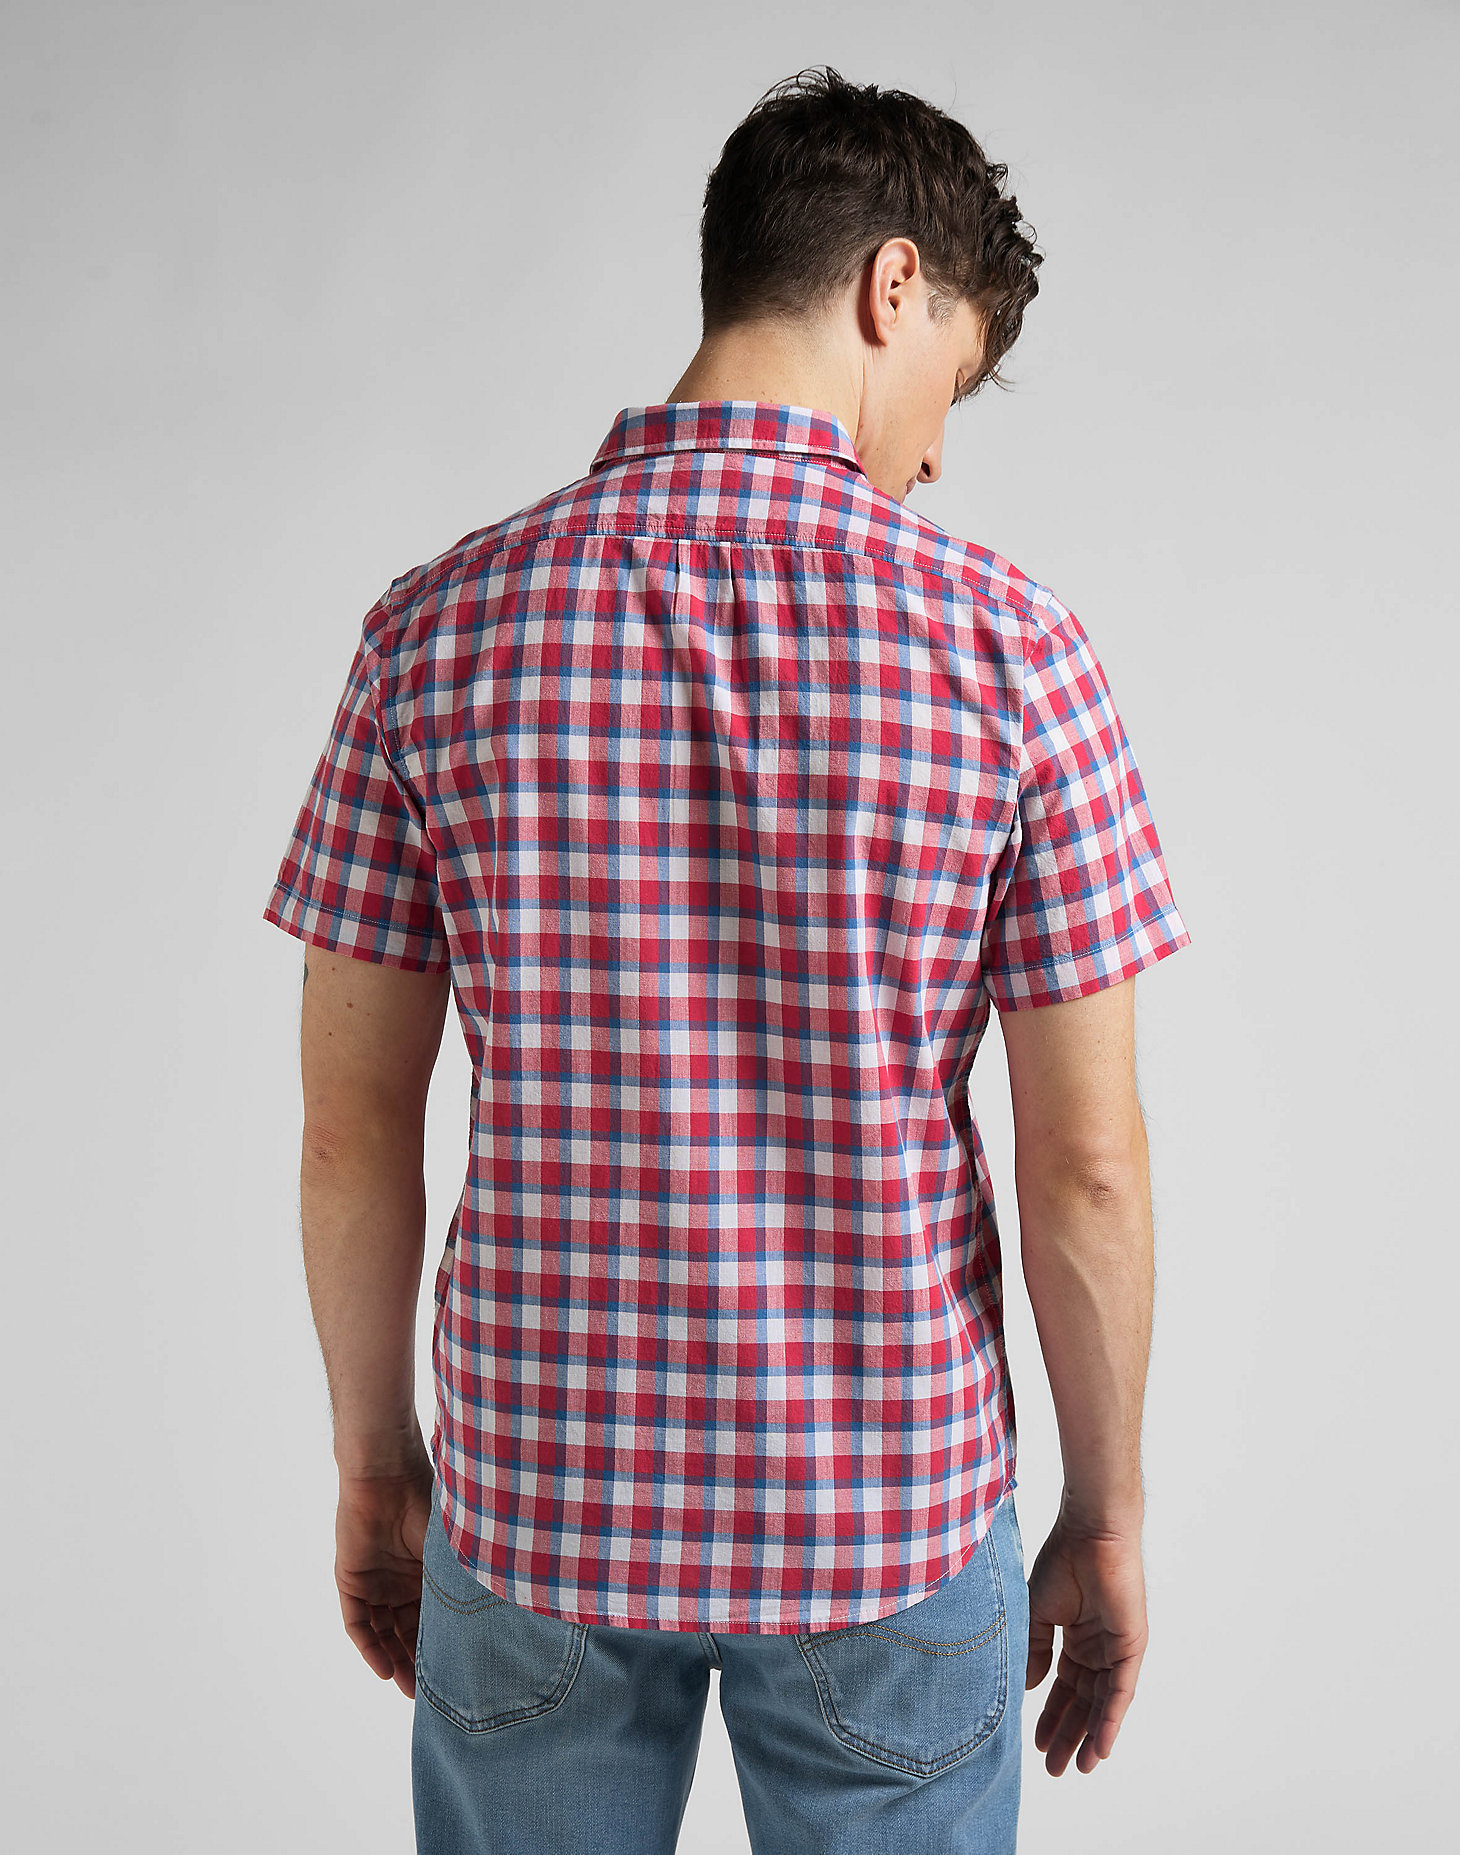 Short Sleeve Button Down Shirt in Real Red alternative view 1